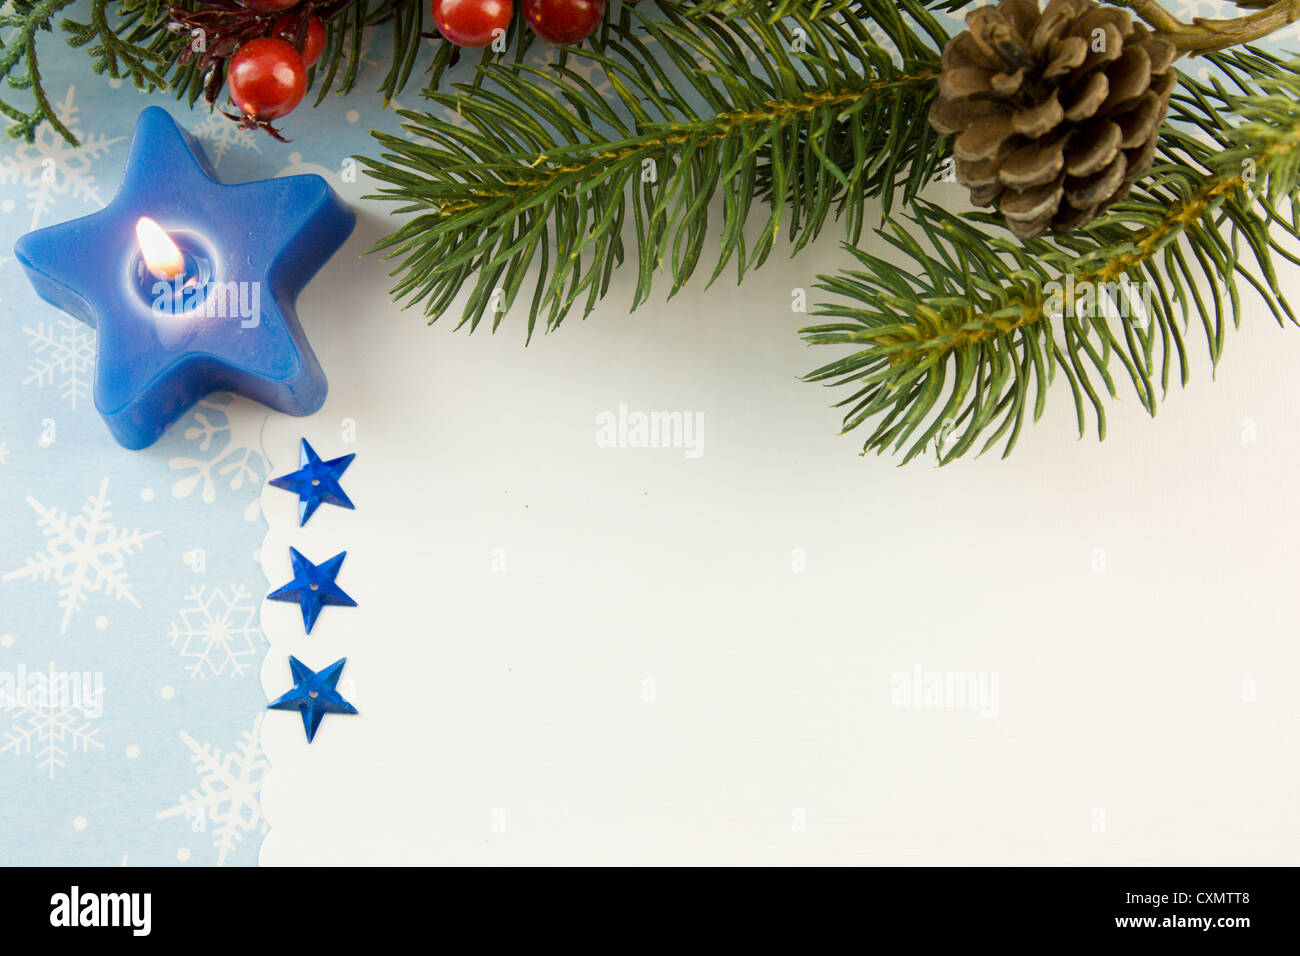 blank Christmas card with blue star candle, fir branch and copyspace Stock Photo